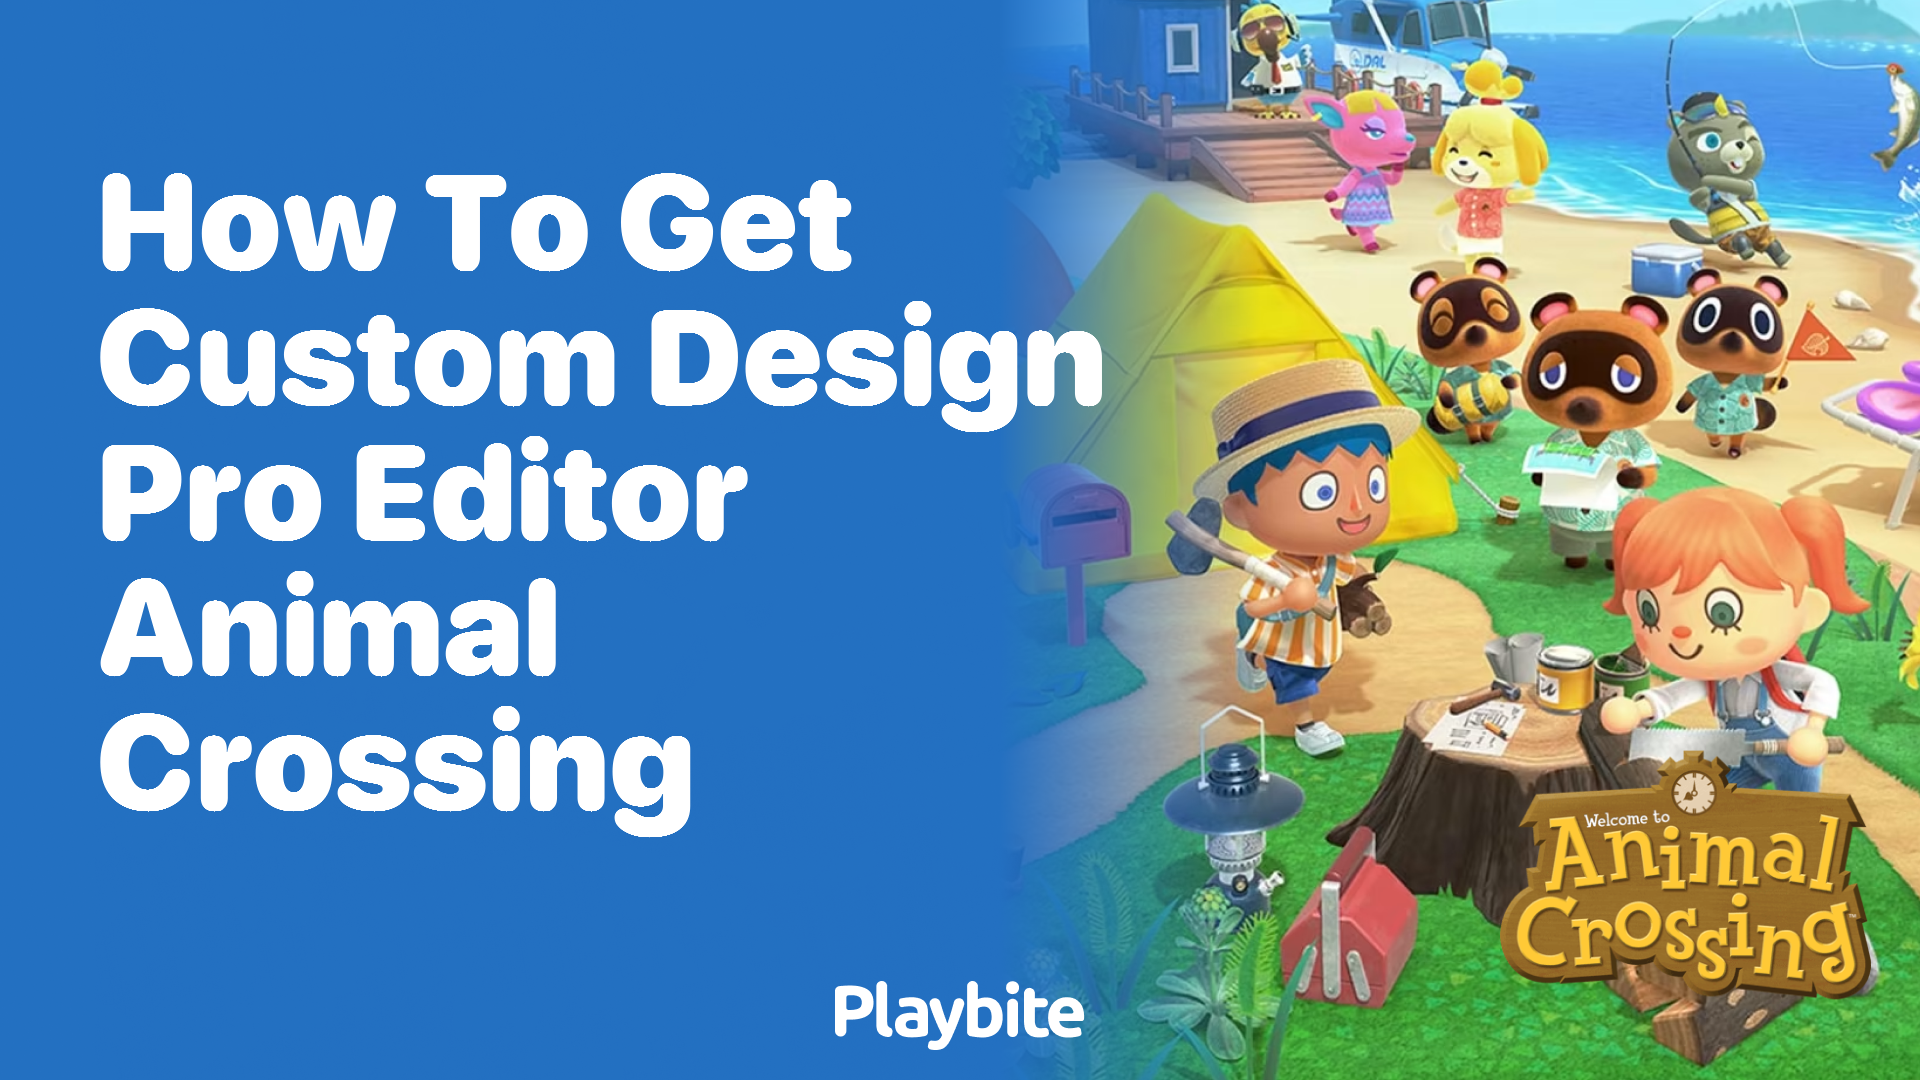 How to get the Custom Design Pro Editor in Animal Crossing